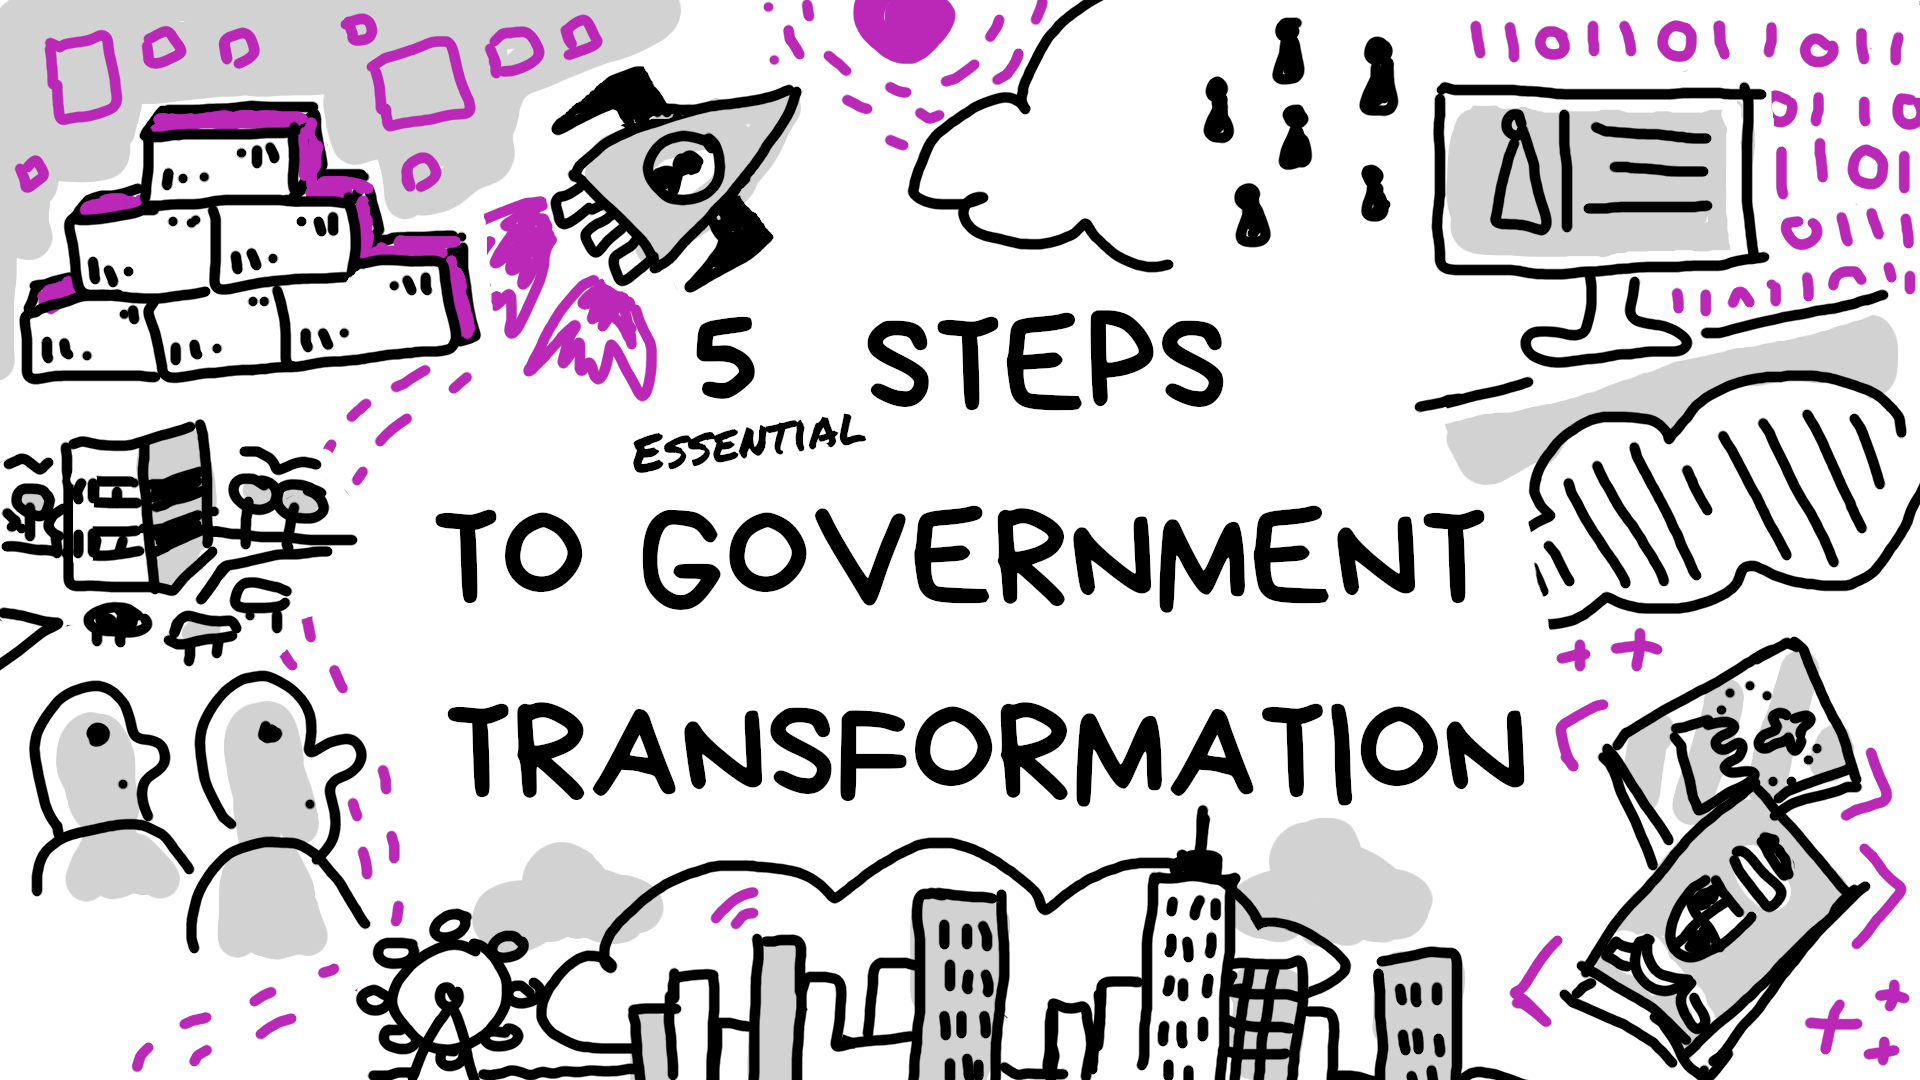 5 Steps to Government Transformation